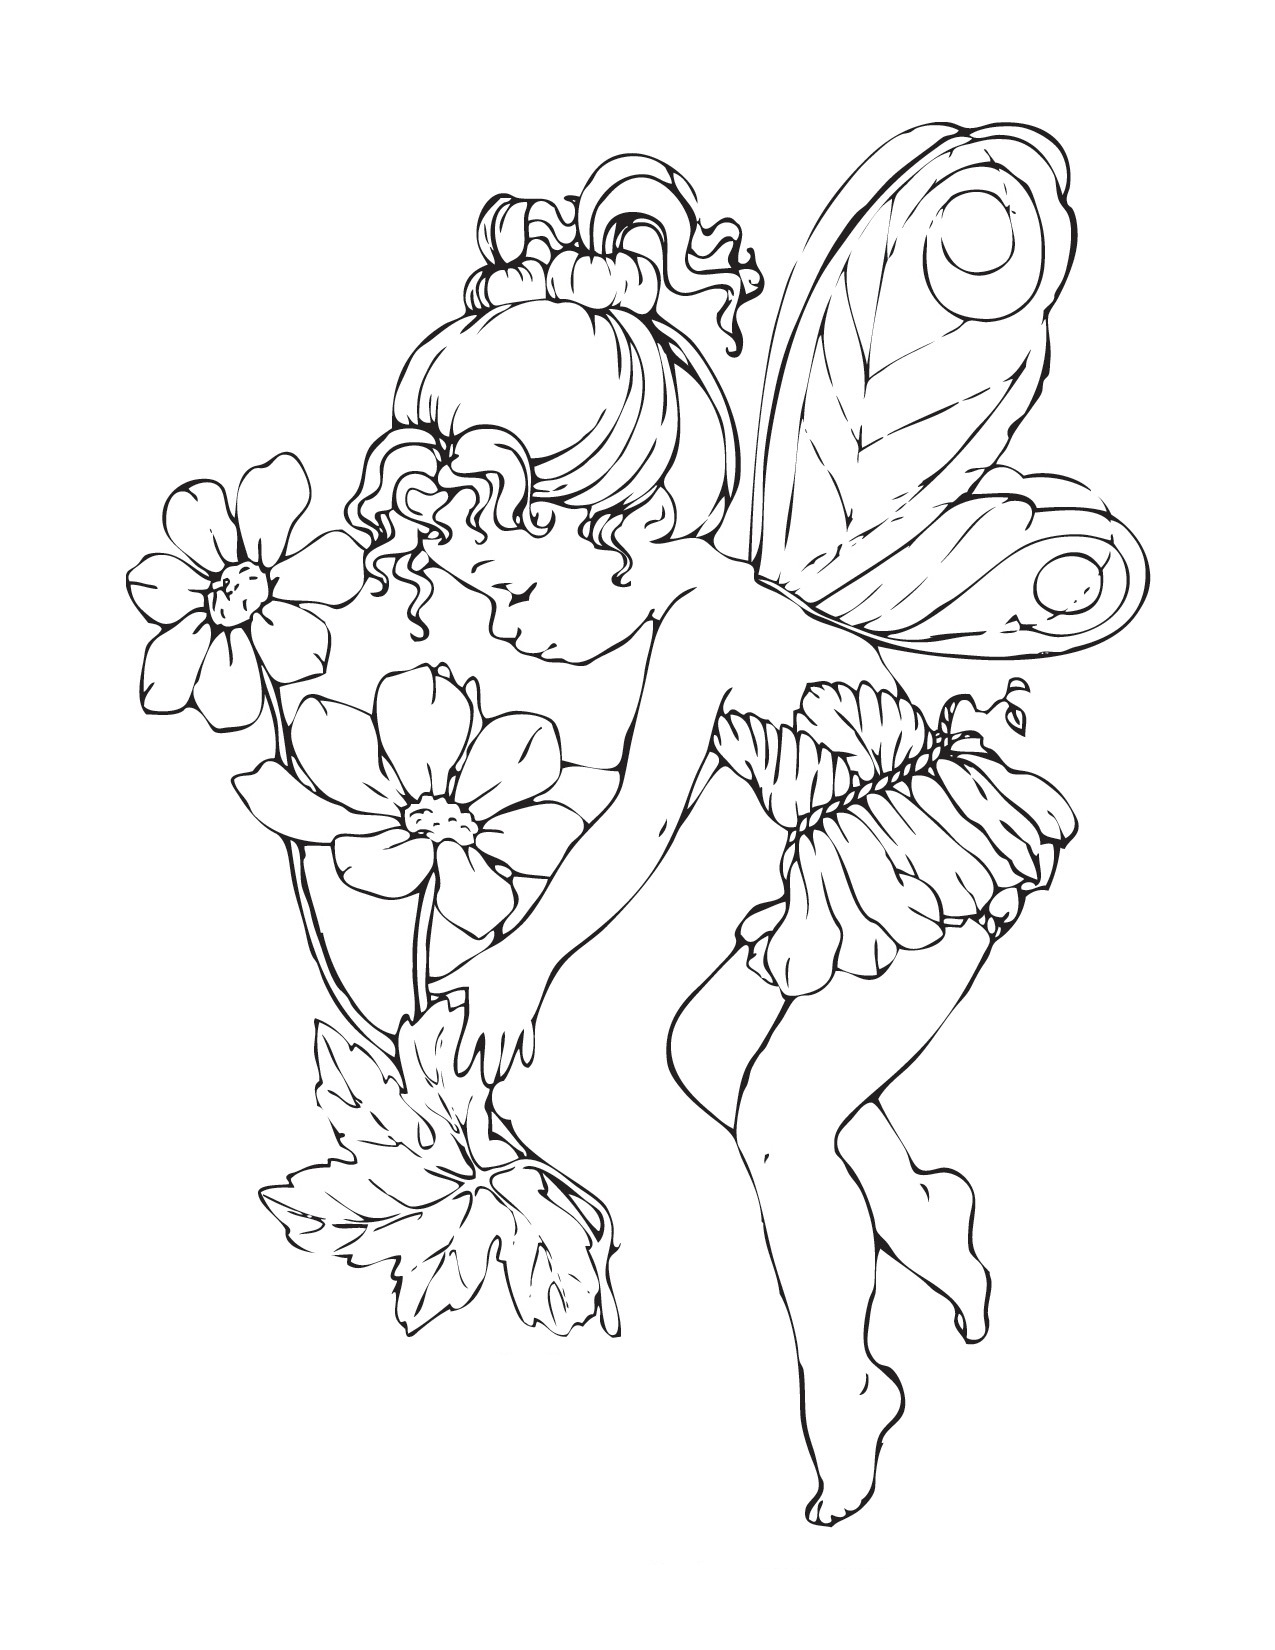 5-best-images-of-printable-pictures-of-fairies-disney-fairies-coloring-pages-to-print-disney